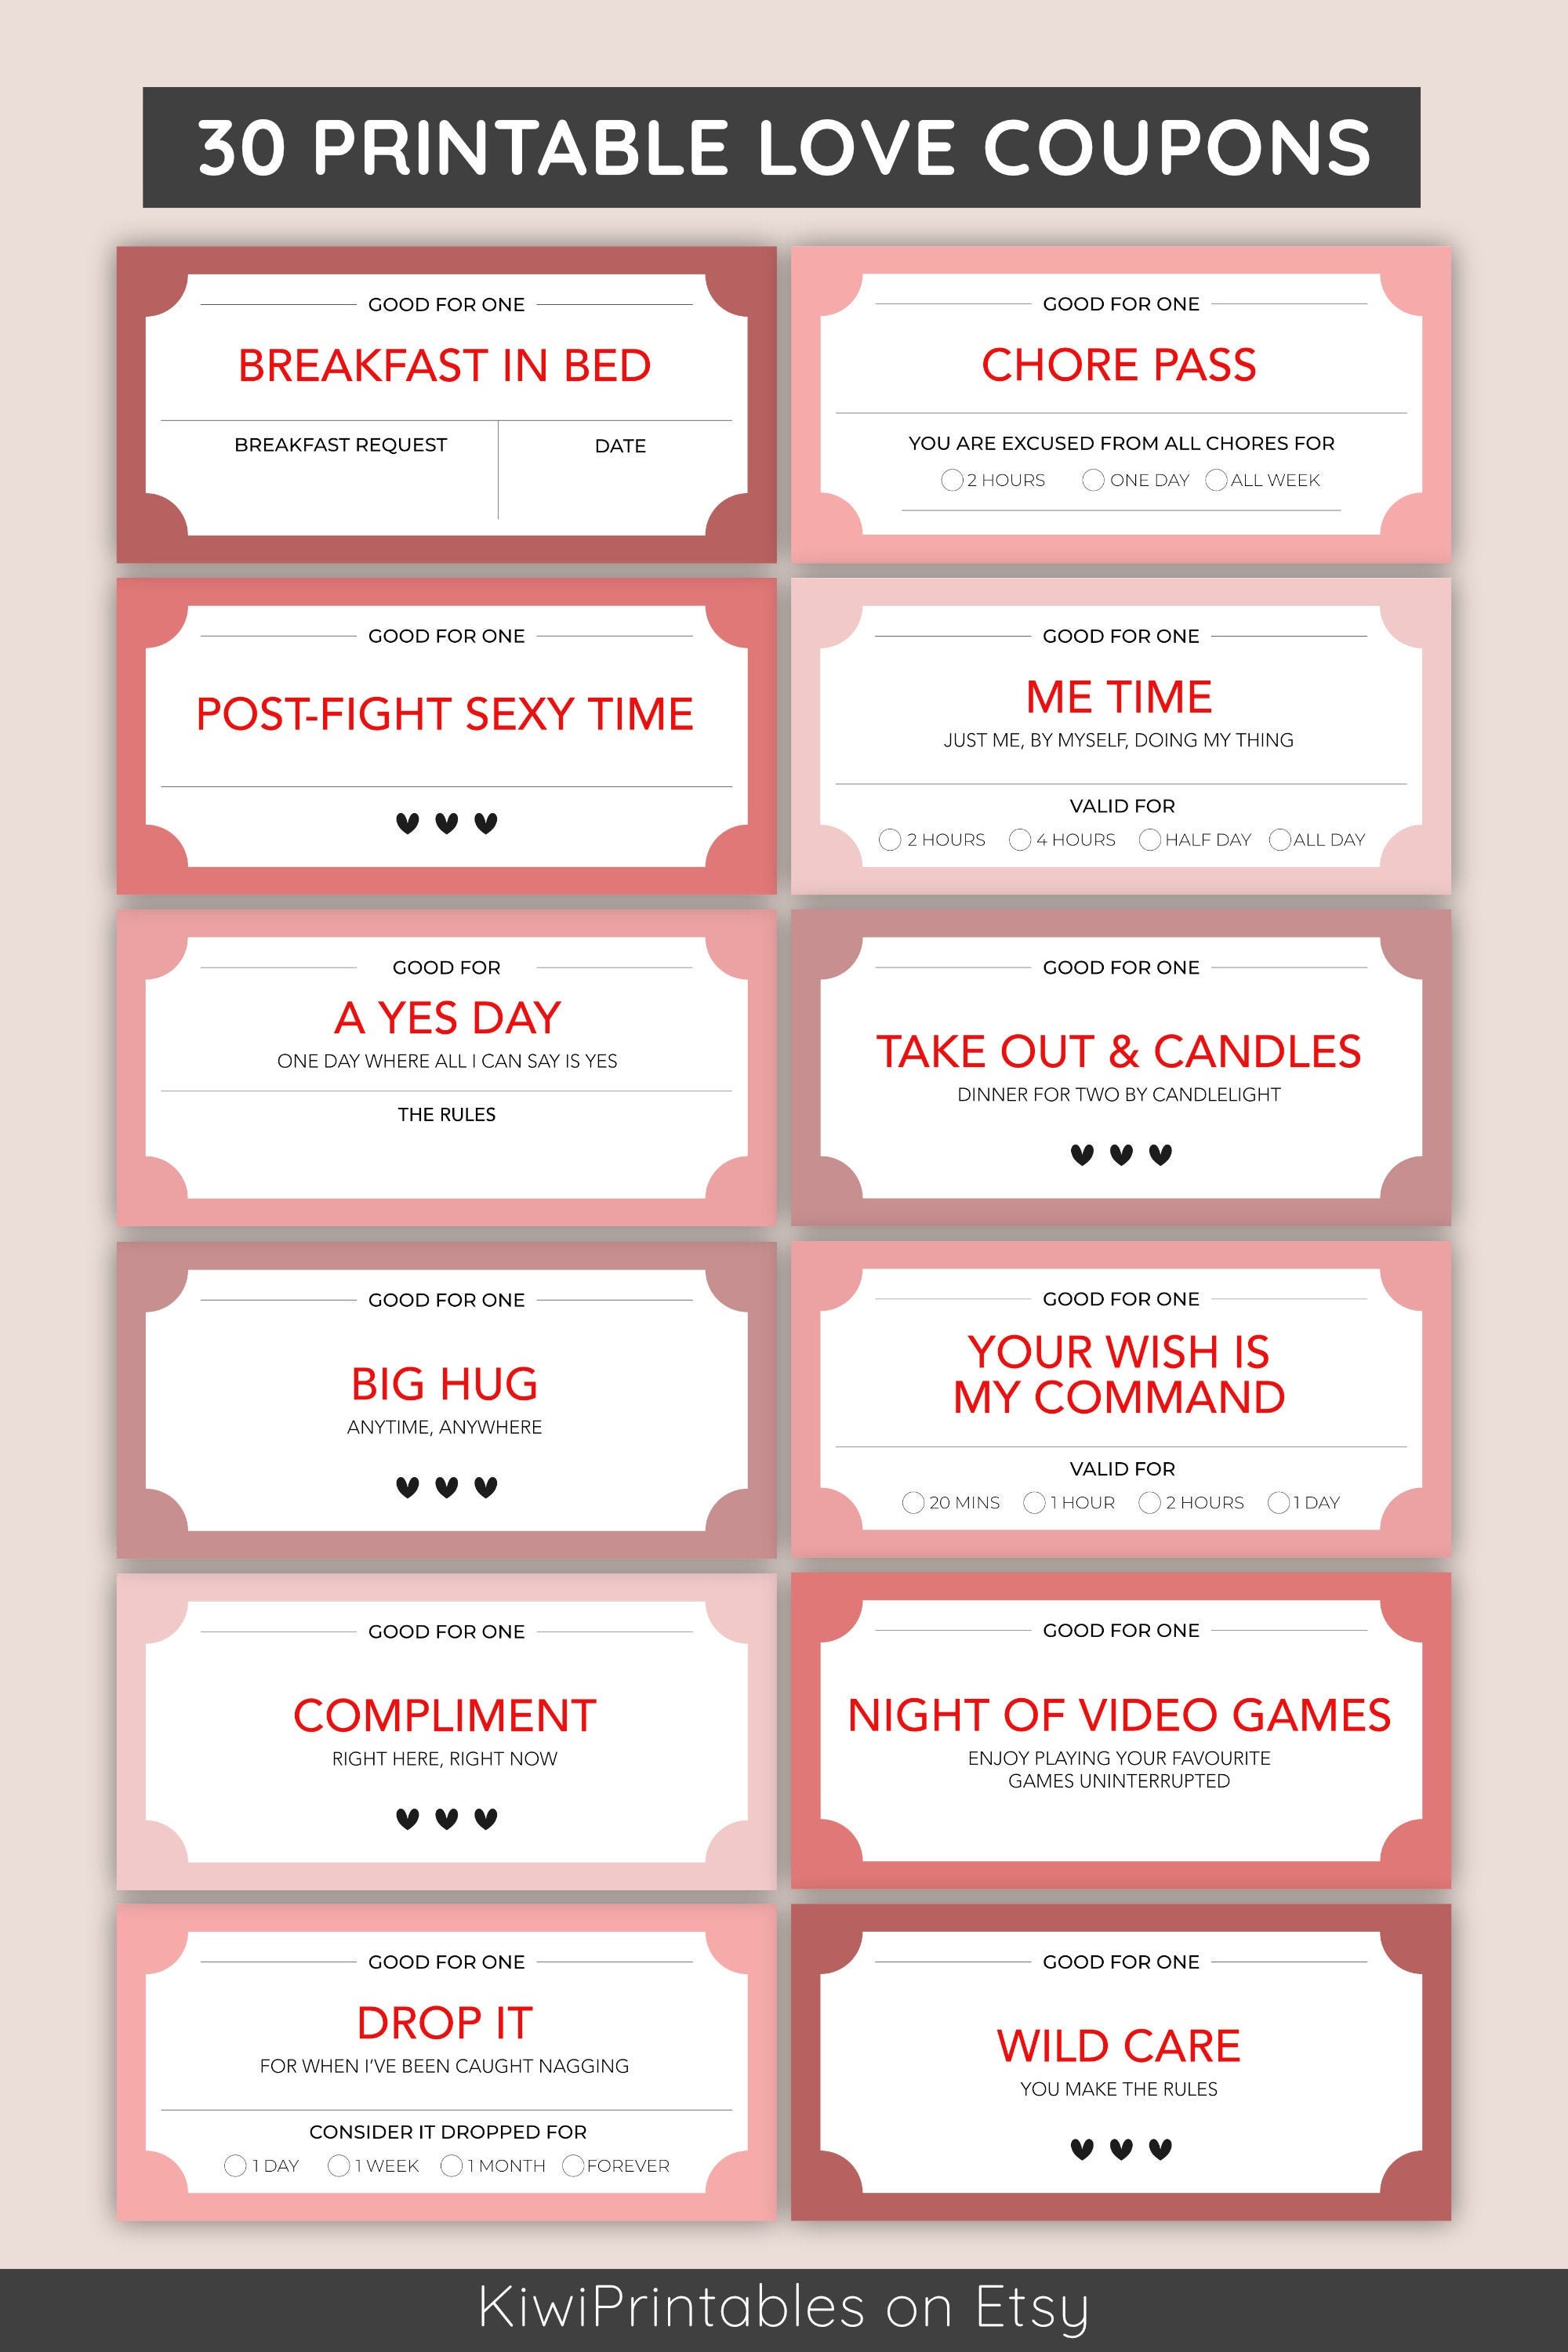 30-fun-love-coupon-book-valentines-day-coupons-love-coupons-etsy-canada